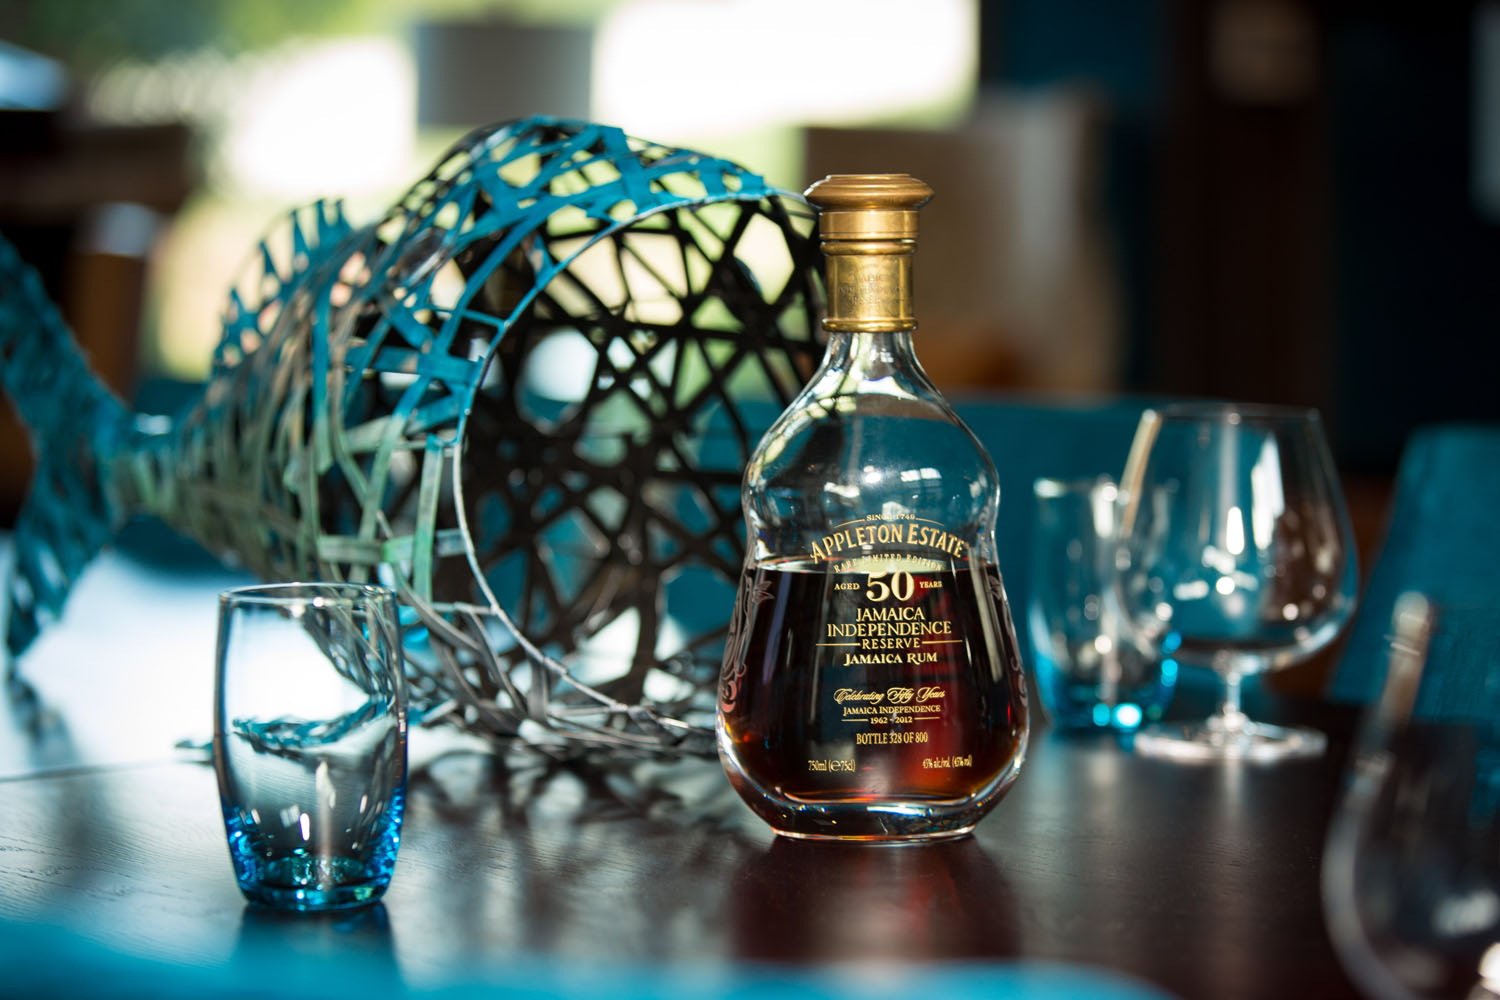 The $650 Rhum at  Zemi Beach House in Anguilla is said to be the oldest rhum (rum) available for sale.